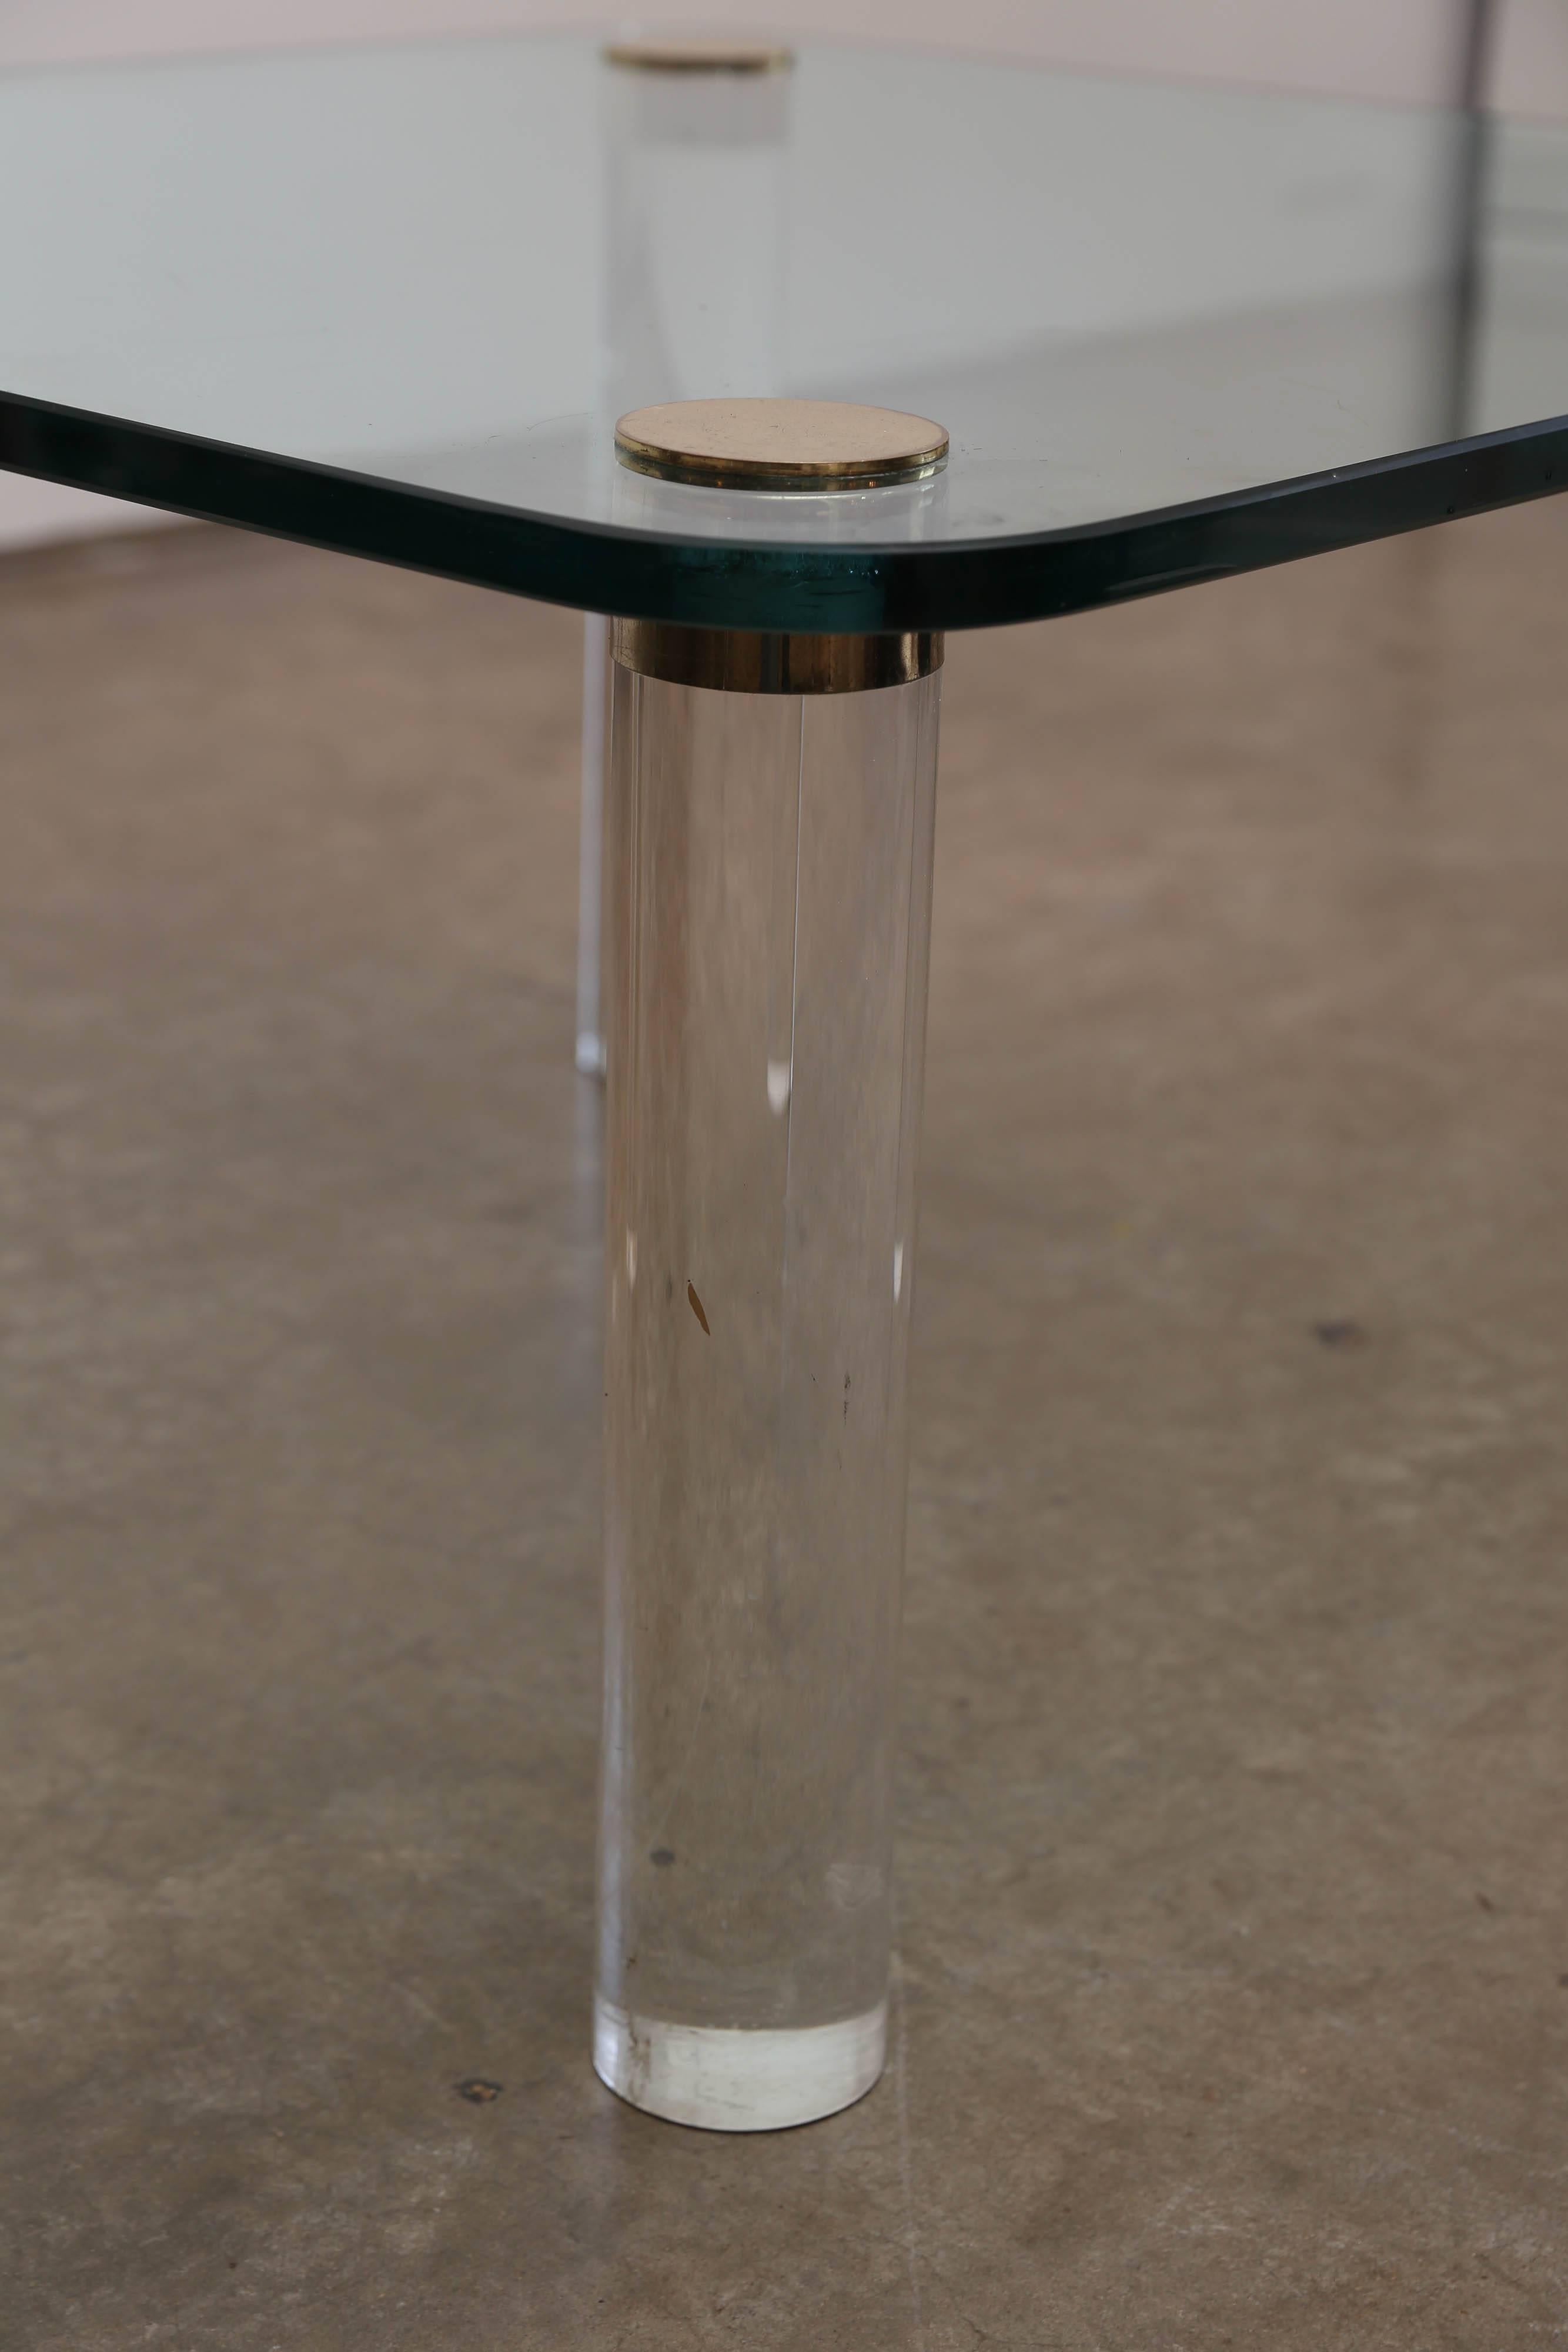 Offered is a vintage modern Pace small coffee, cocktail, side or occasional table. The top of the table is made from glass and the legs are thick Lucite with brass caps that screw in from the top side of the table.